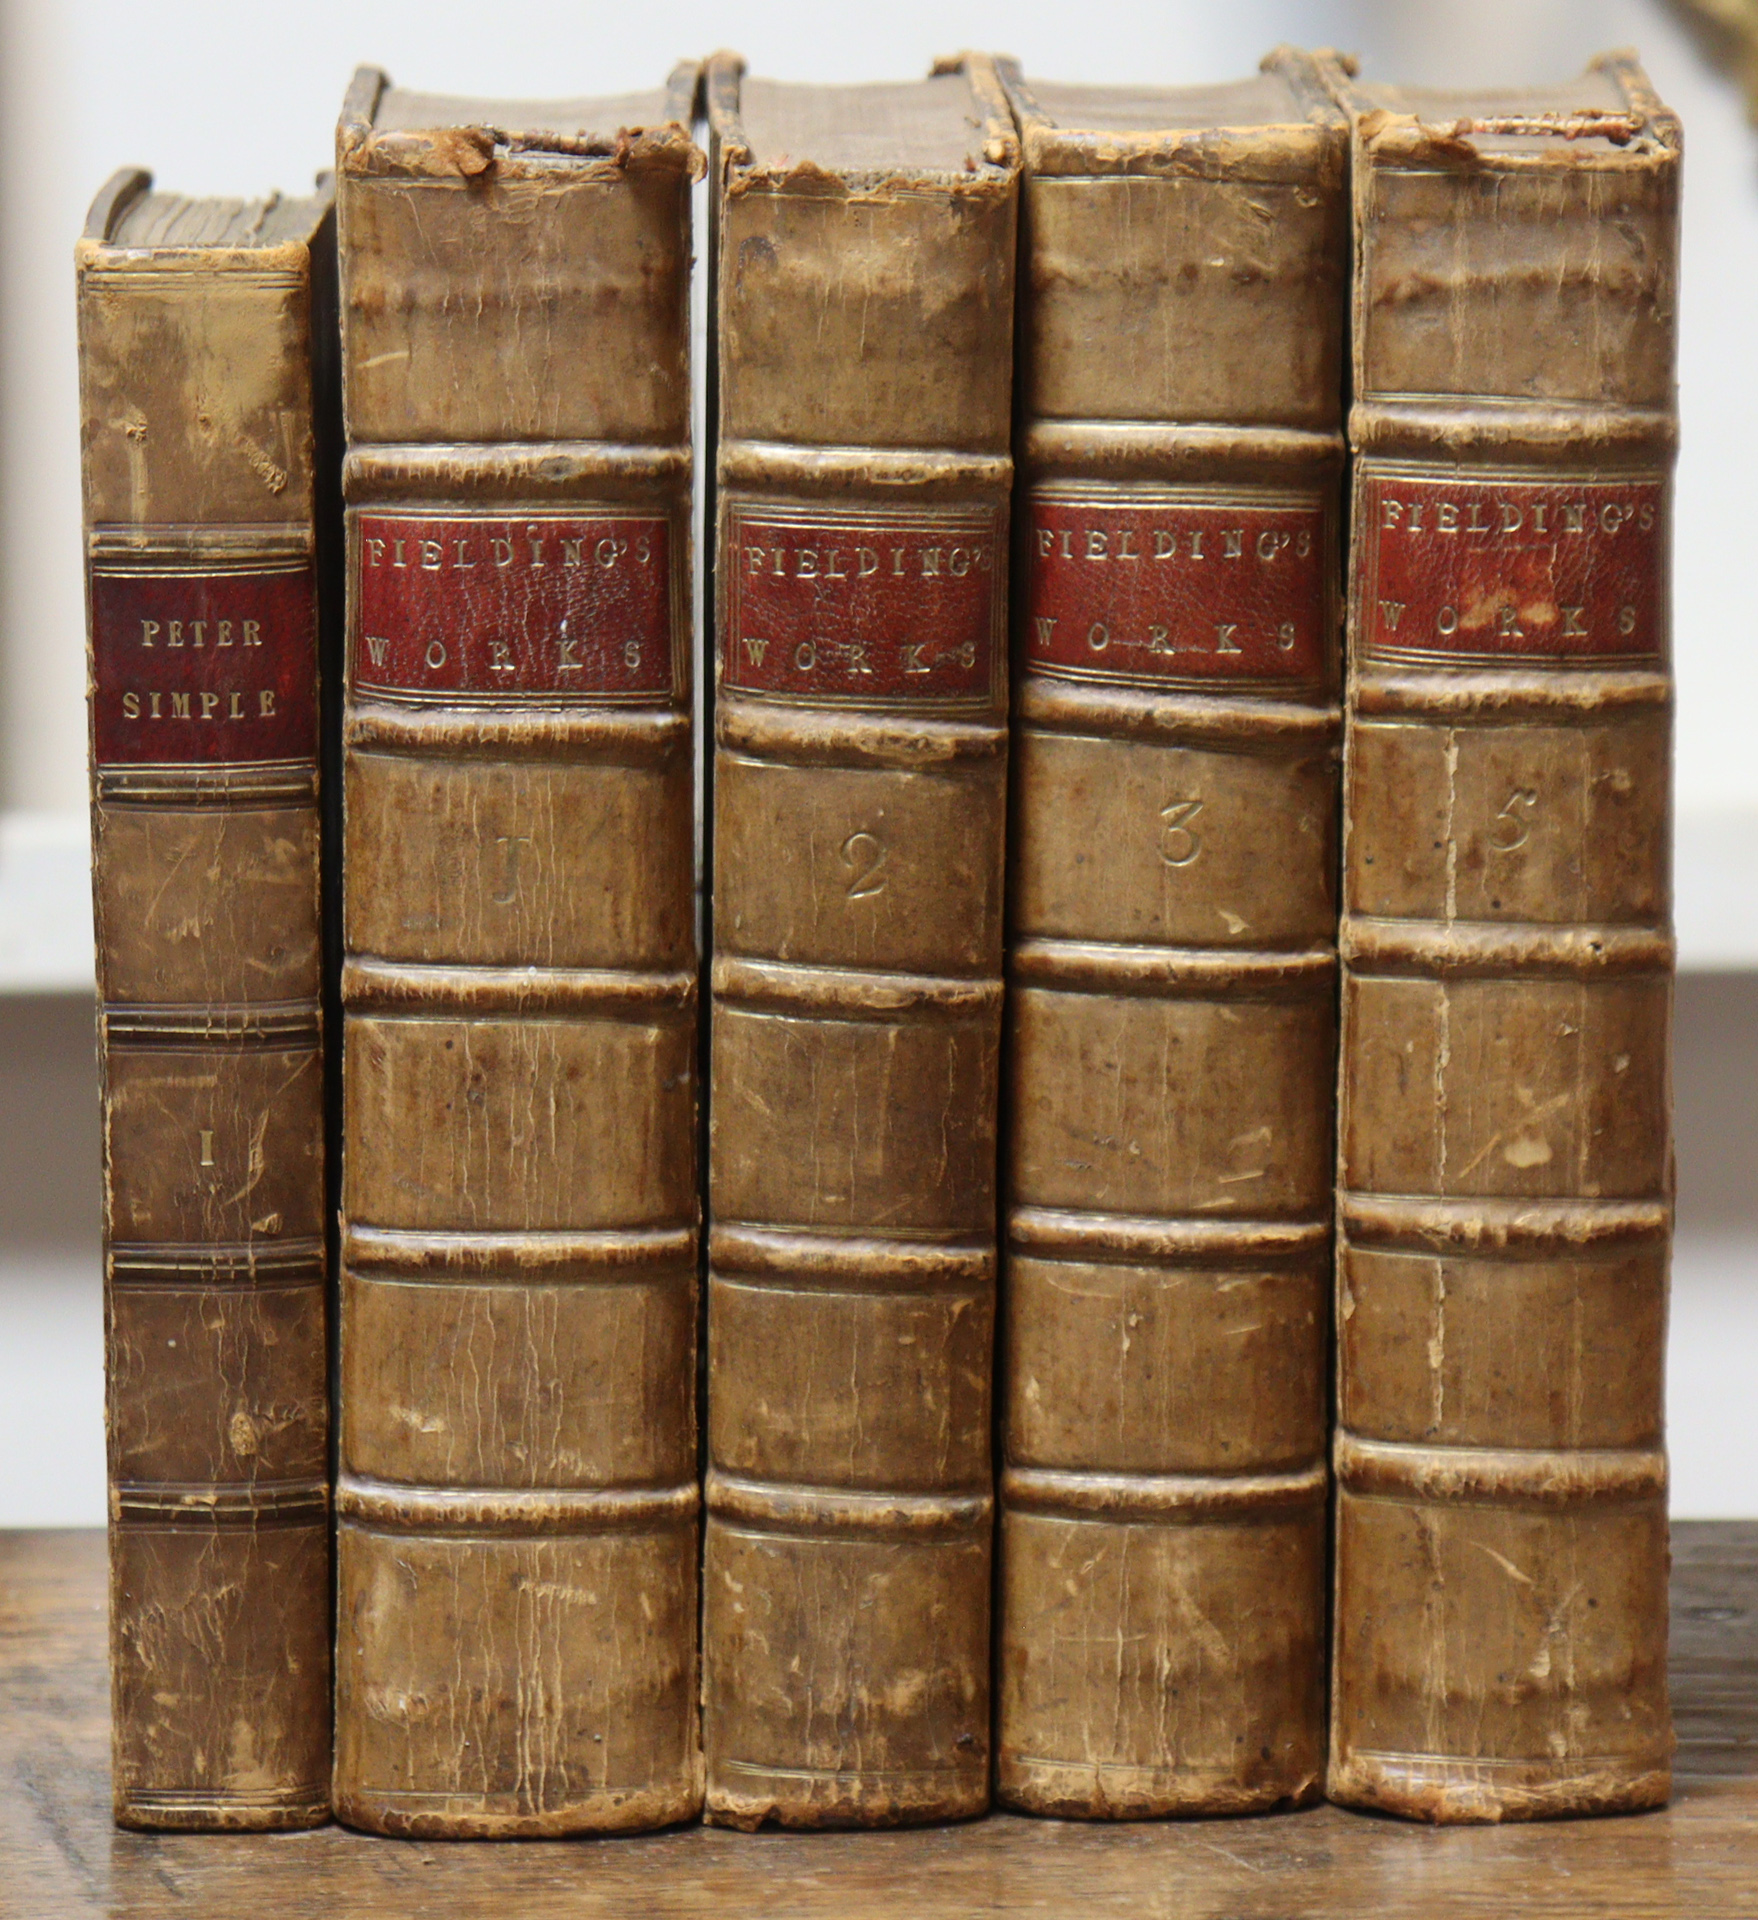 The Works of Henry Fielding, Esq., vols I, II, III & V (of 8), Published 1757, London by A Millar,